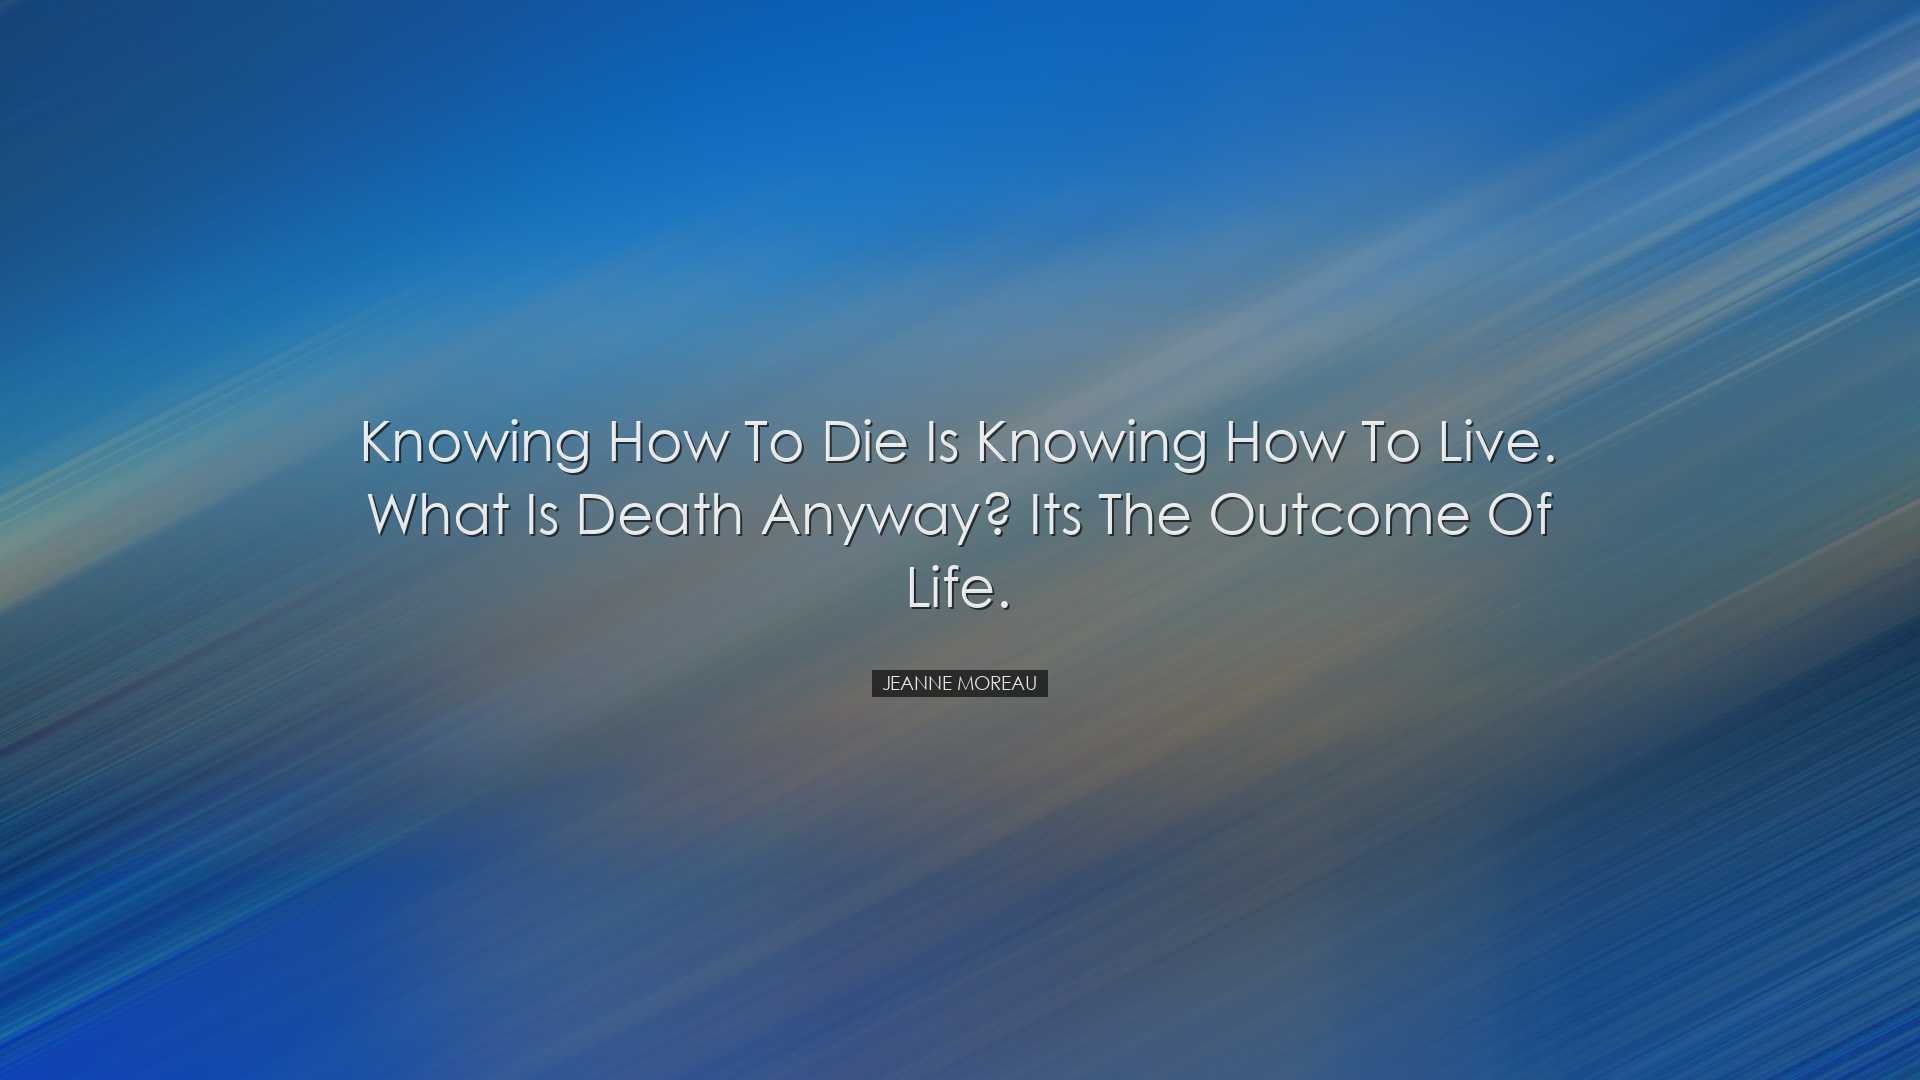 Knowing how to die is knowing how to live. What is death anyway? I